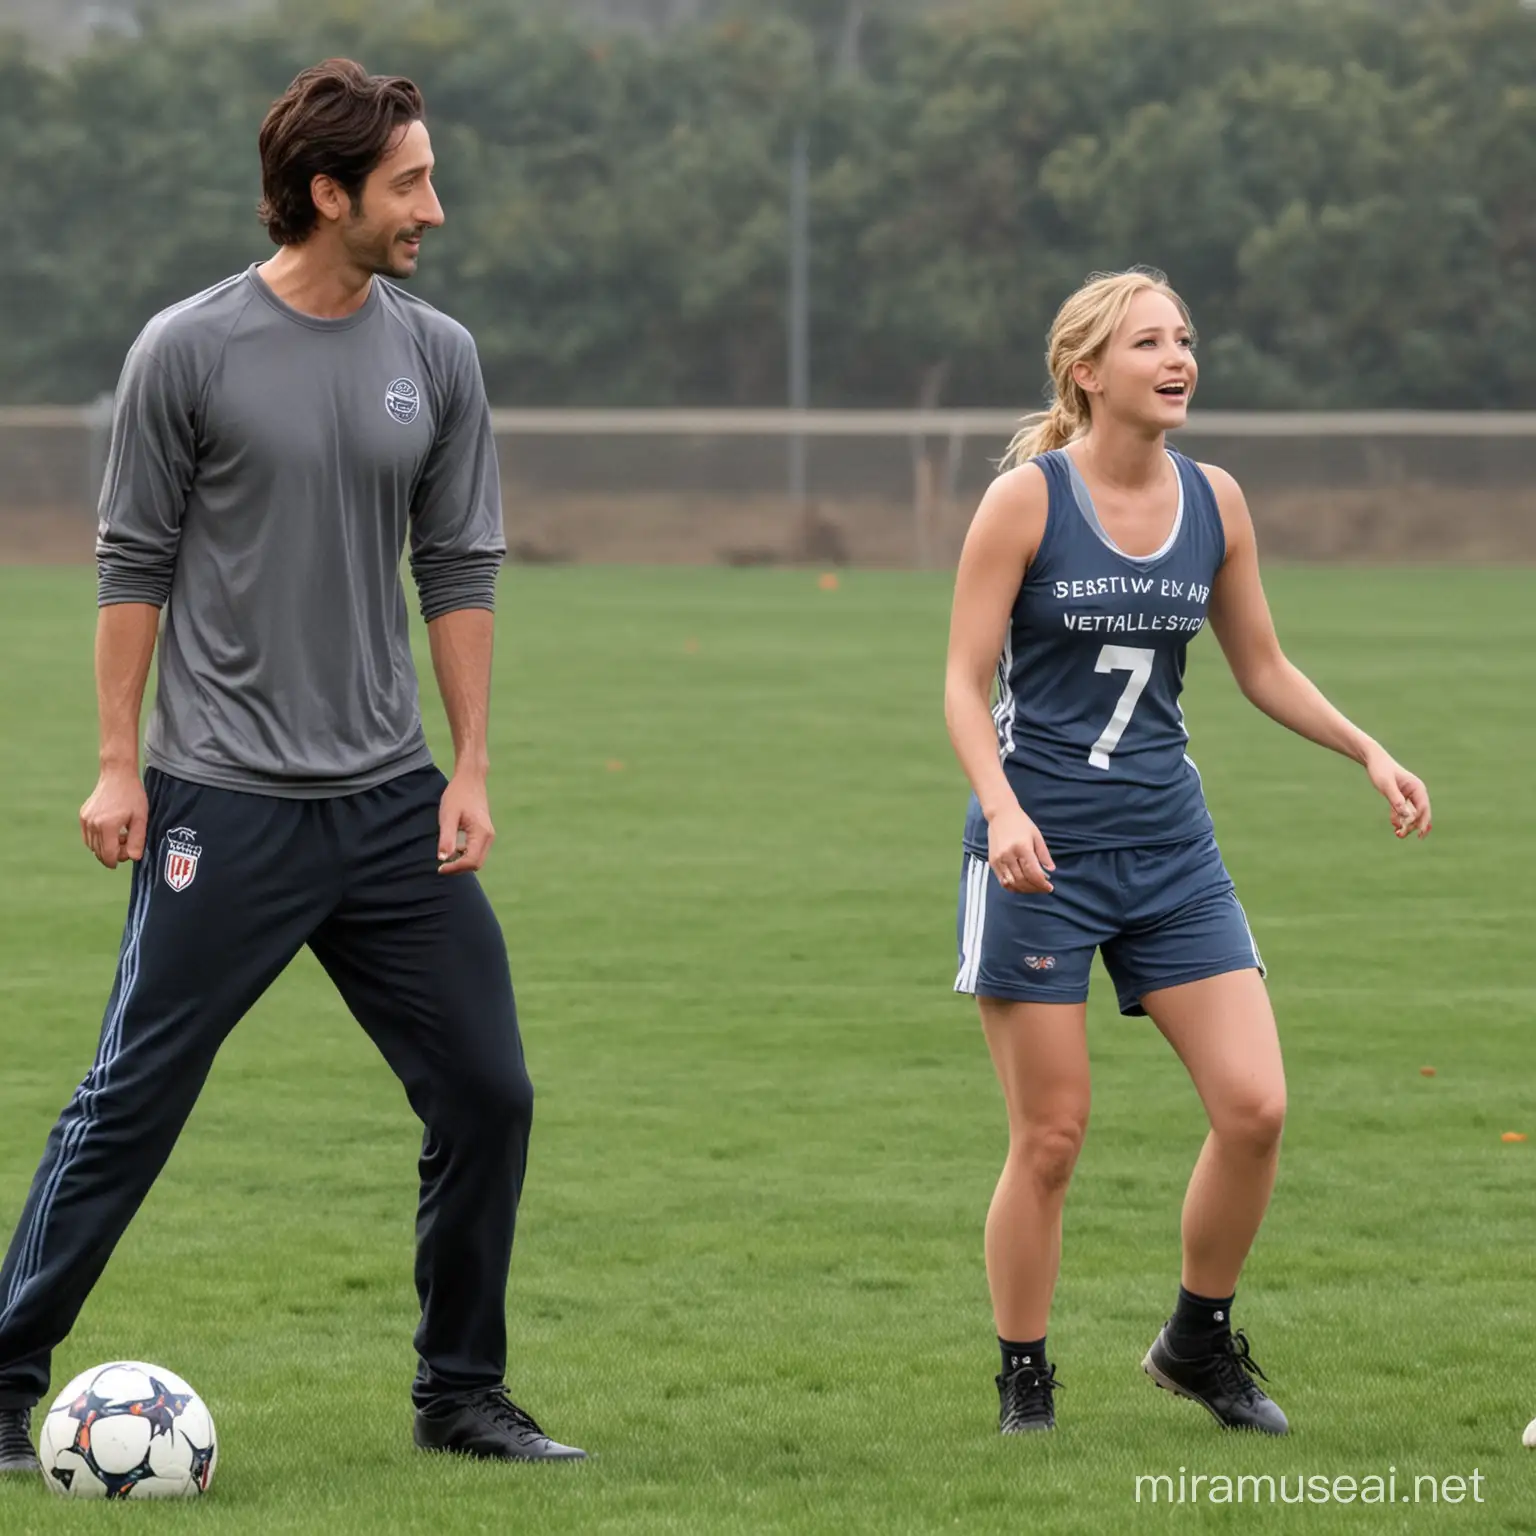 Adrien Brody and Jennifer Lawrence play football